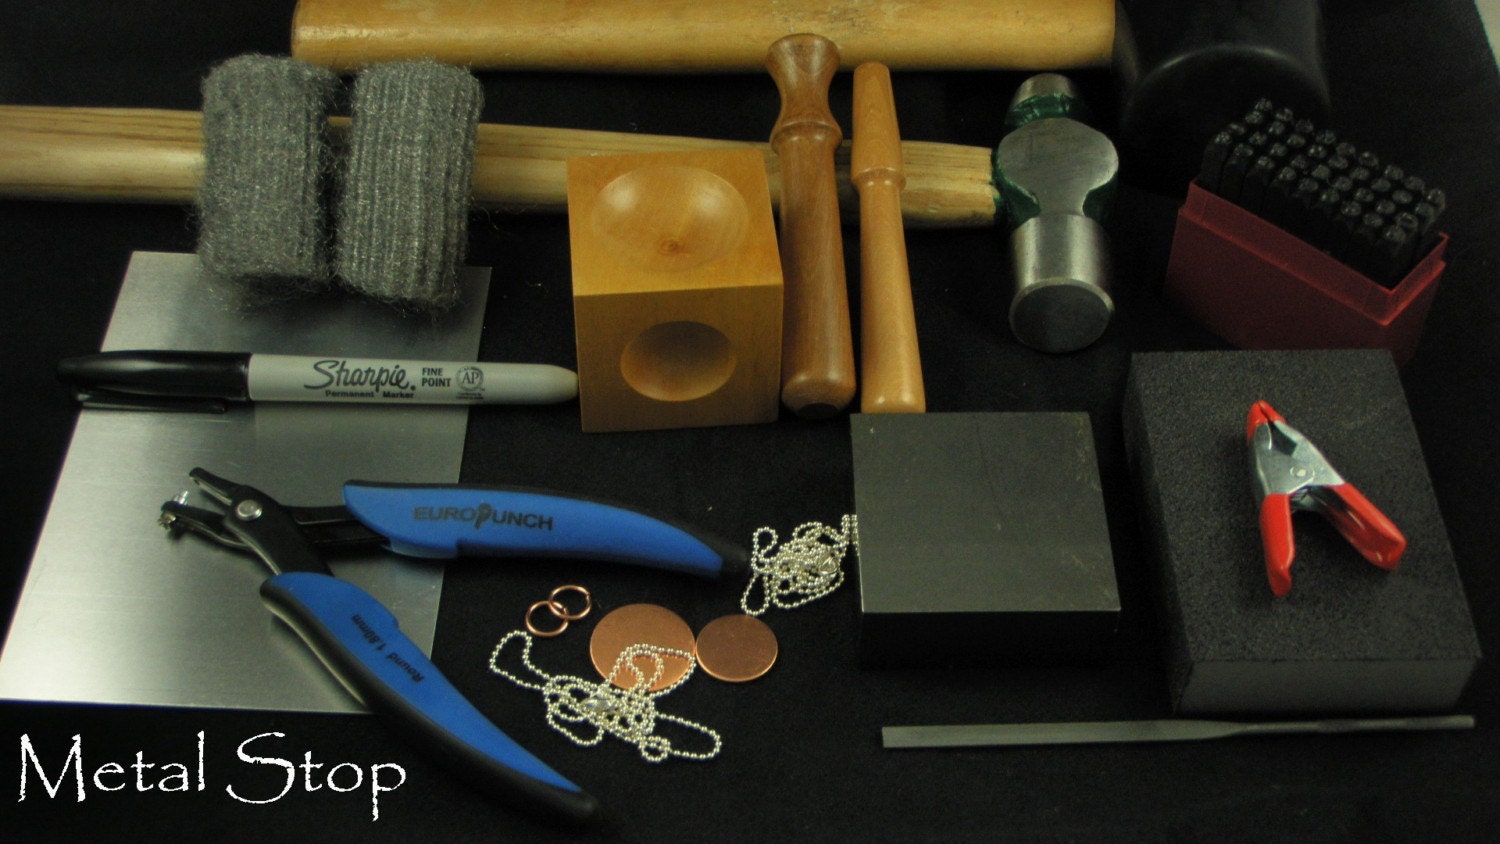 Awesome Starter METAL JEWELRY STAMPING Kit The Tools You Need